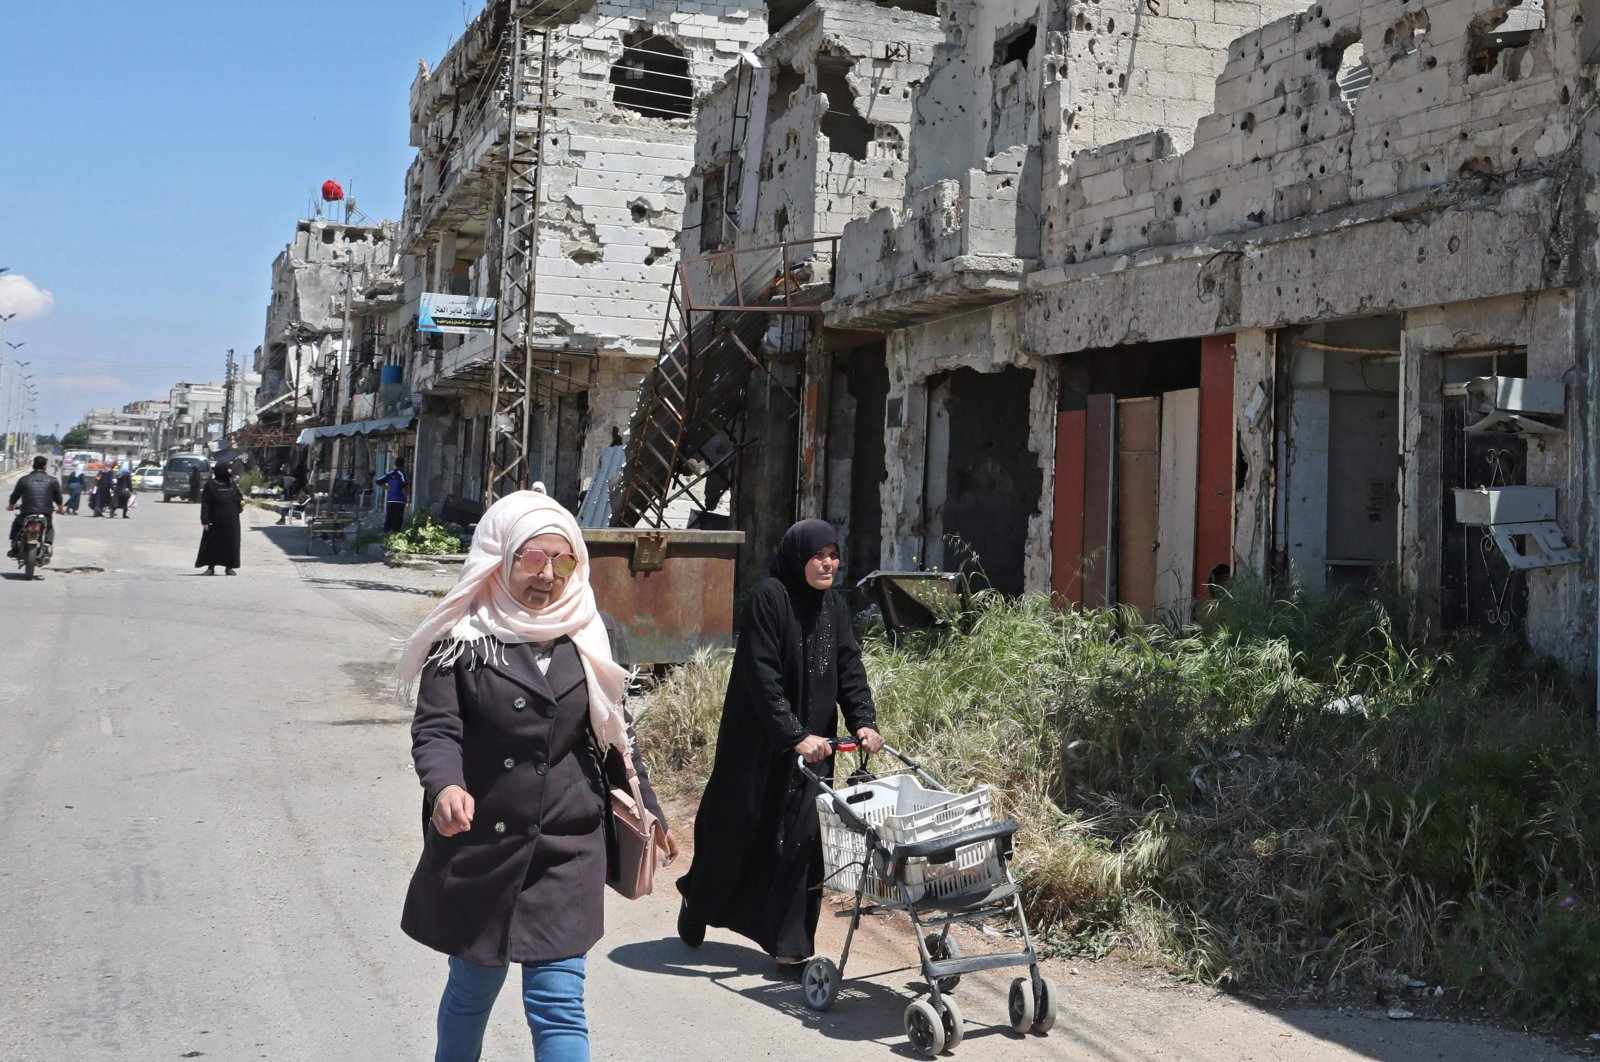 Syrians walk past buildings heavily damaged during Syria's civil war, in the central city of Homs, April 28, 2020. (AFP)